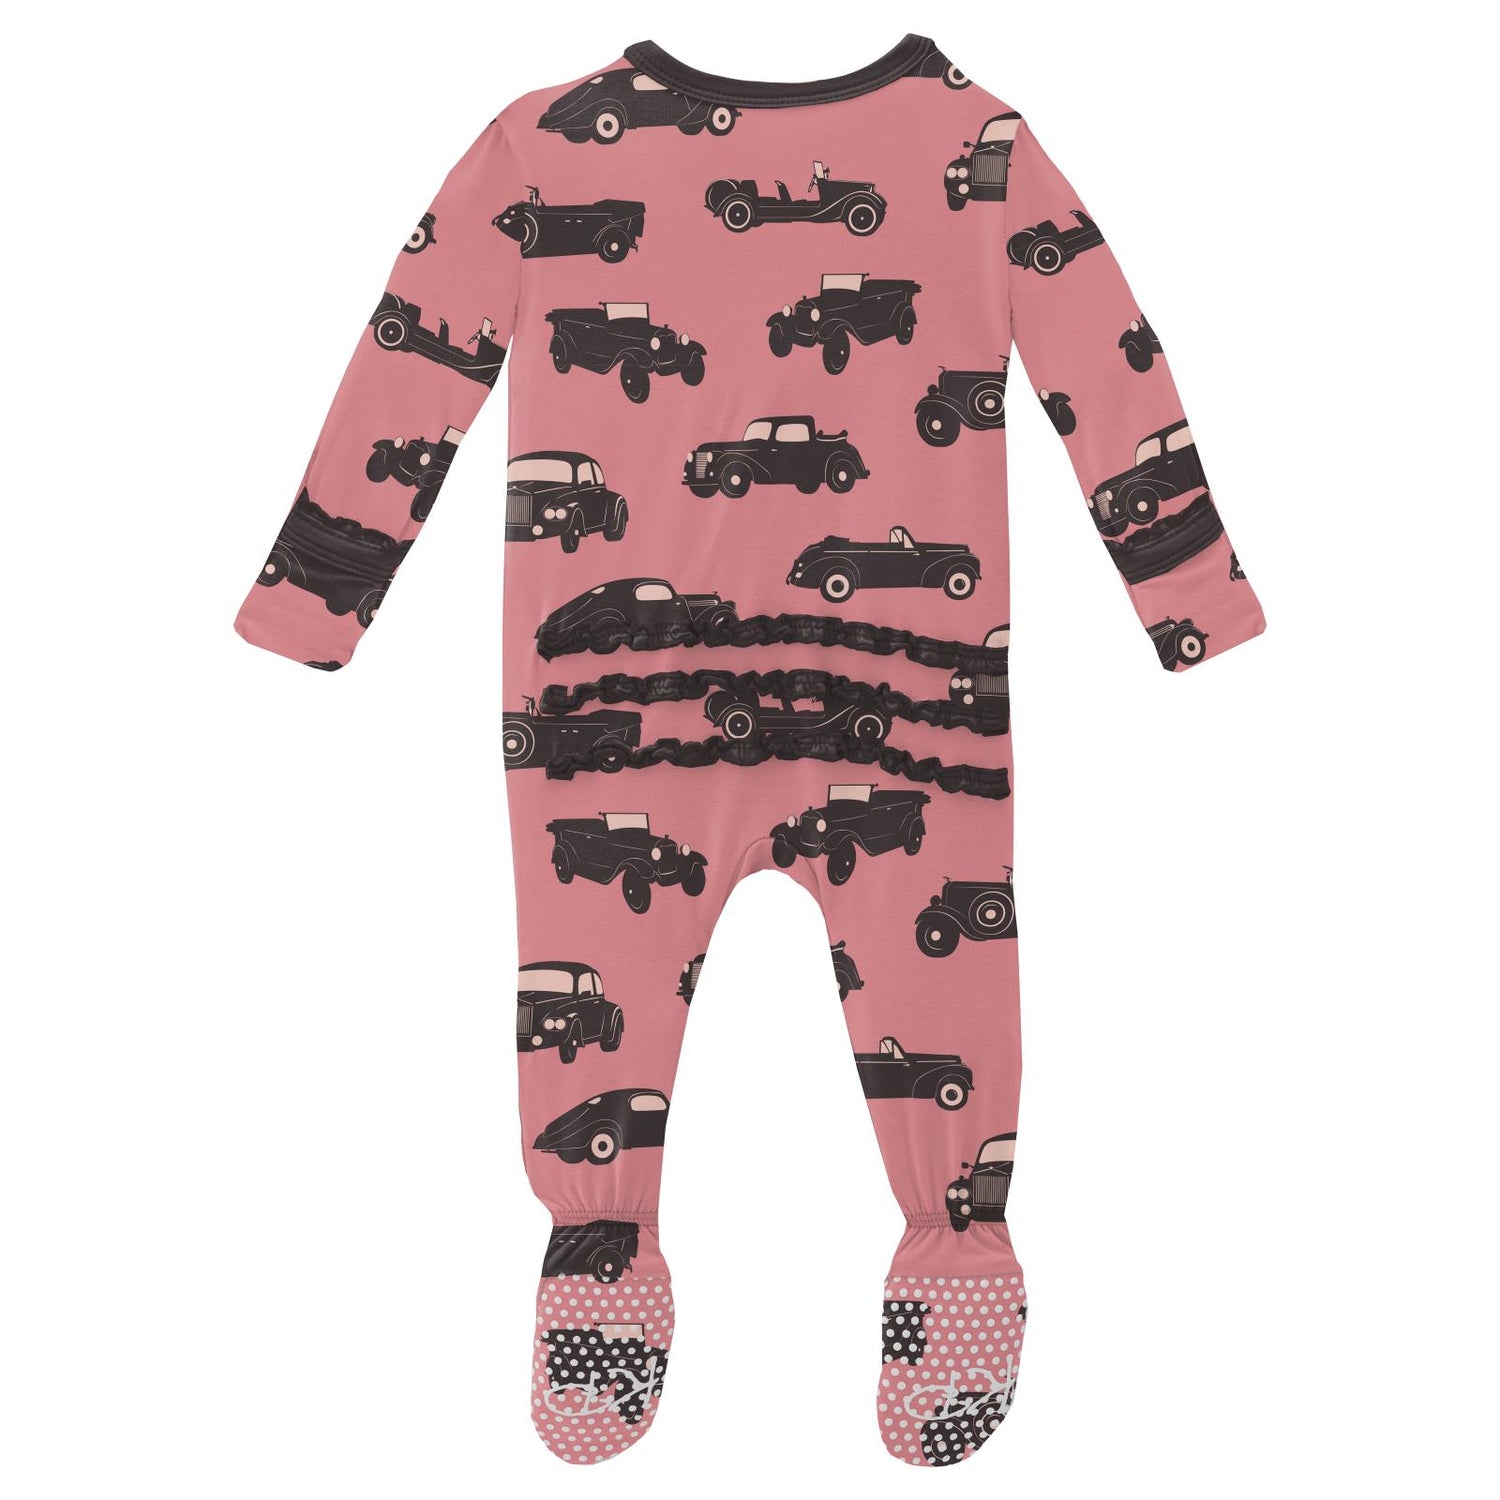 Print Muffin Ruffle Footie with Zipper in Desert Rose Vintage Cars